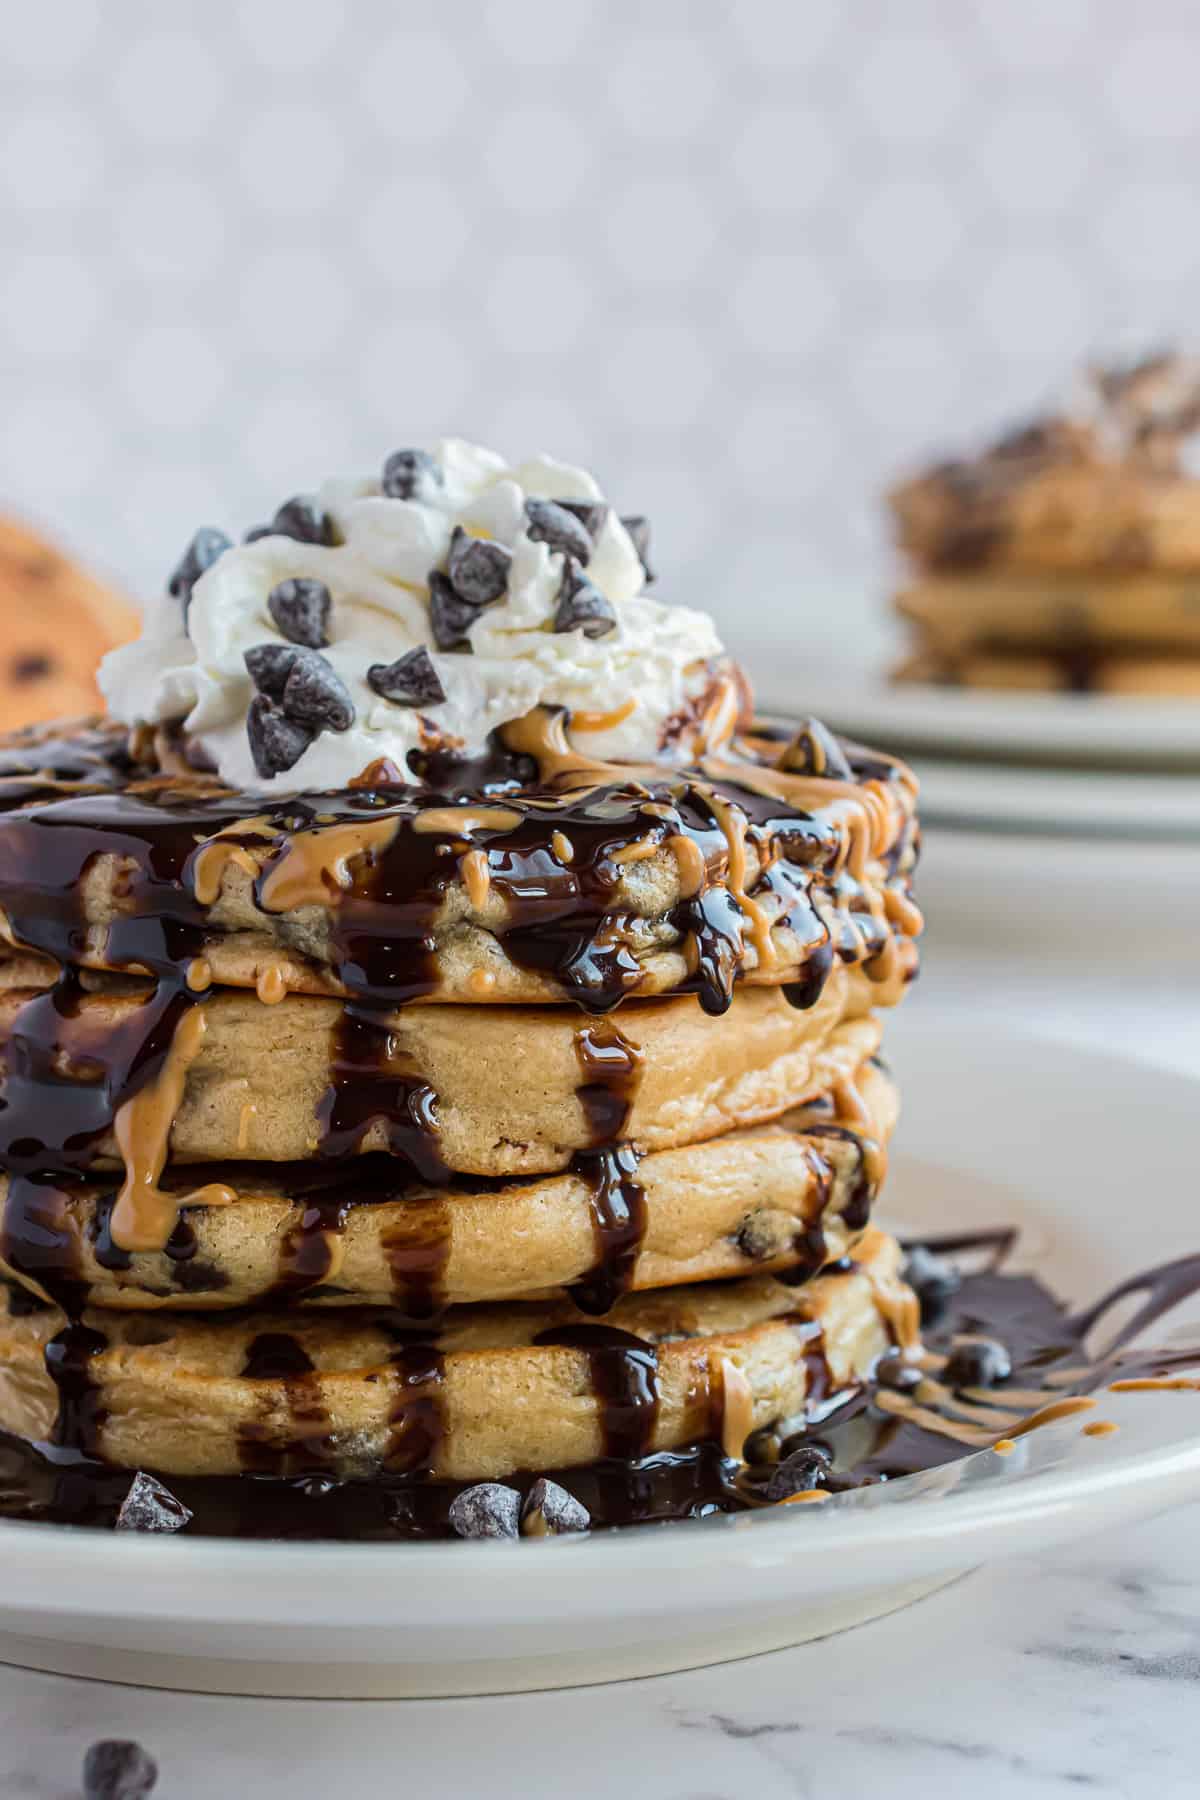 Stack of pancakes with chocolate syrup and whipped cream.